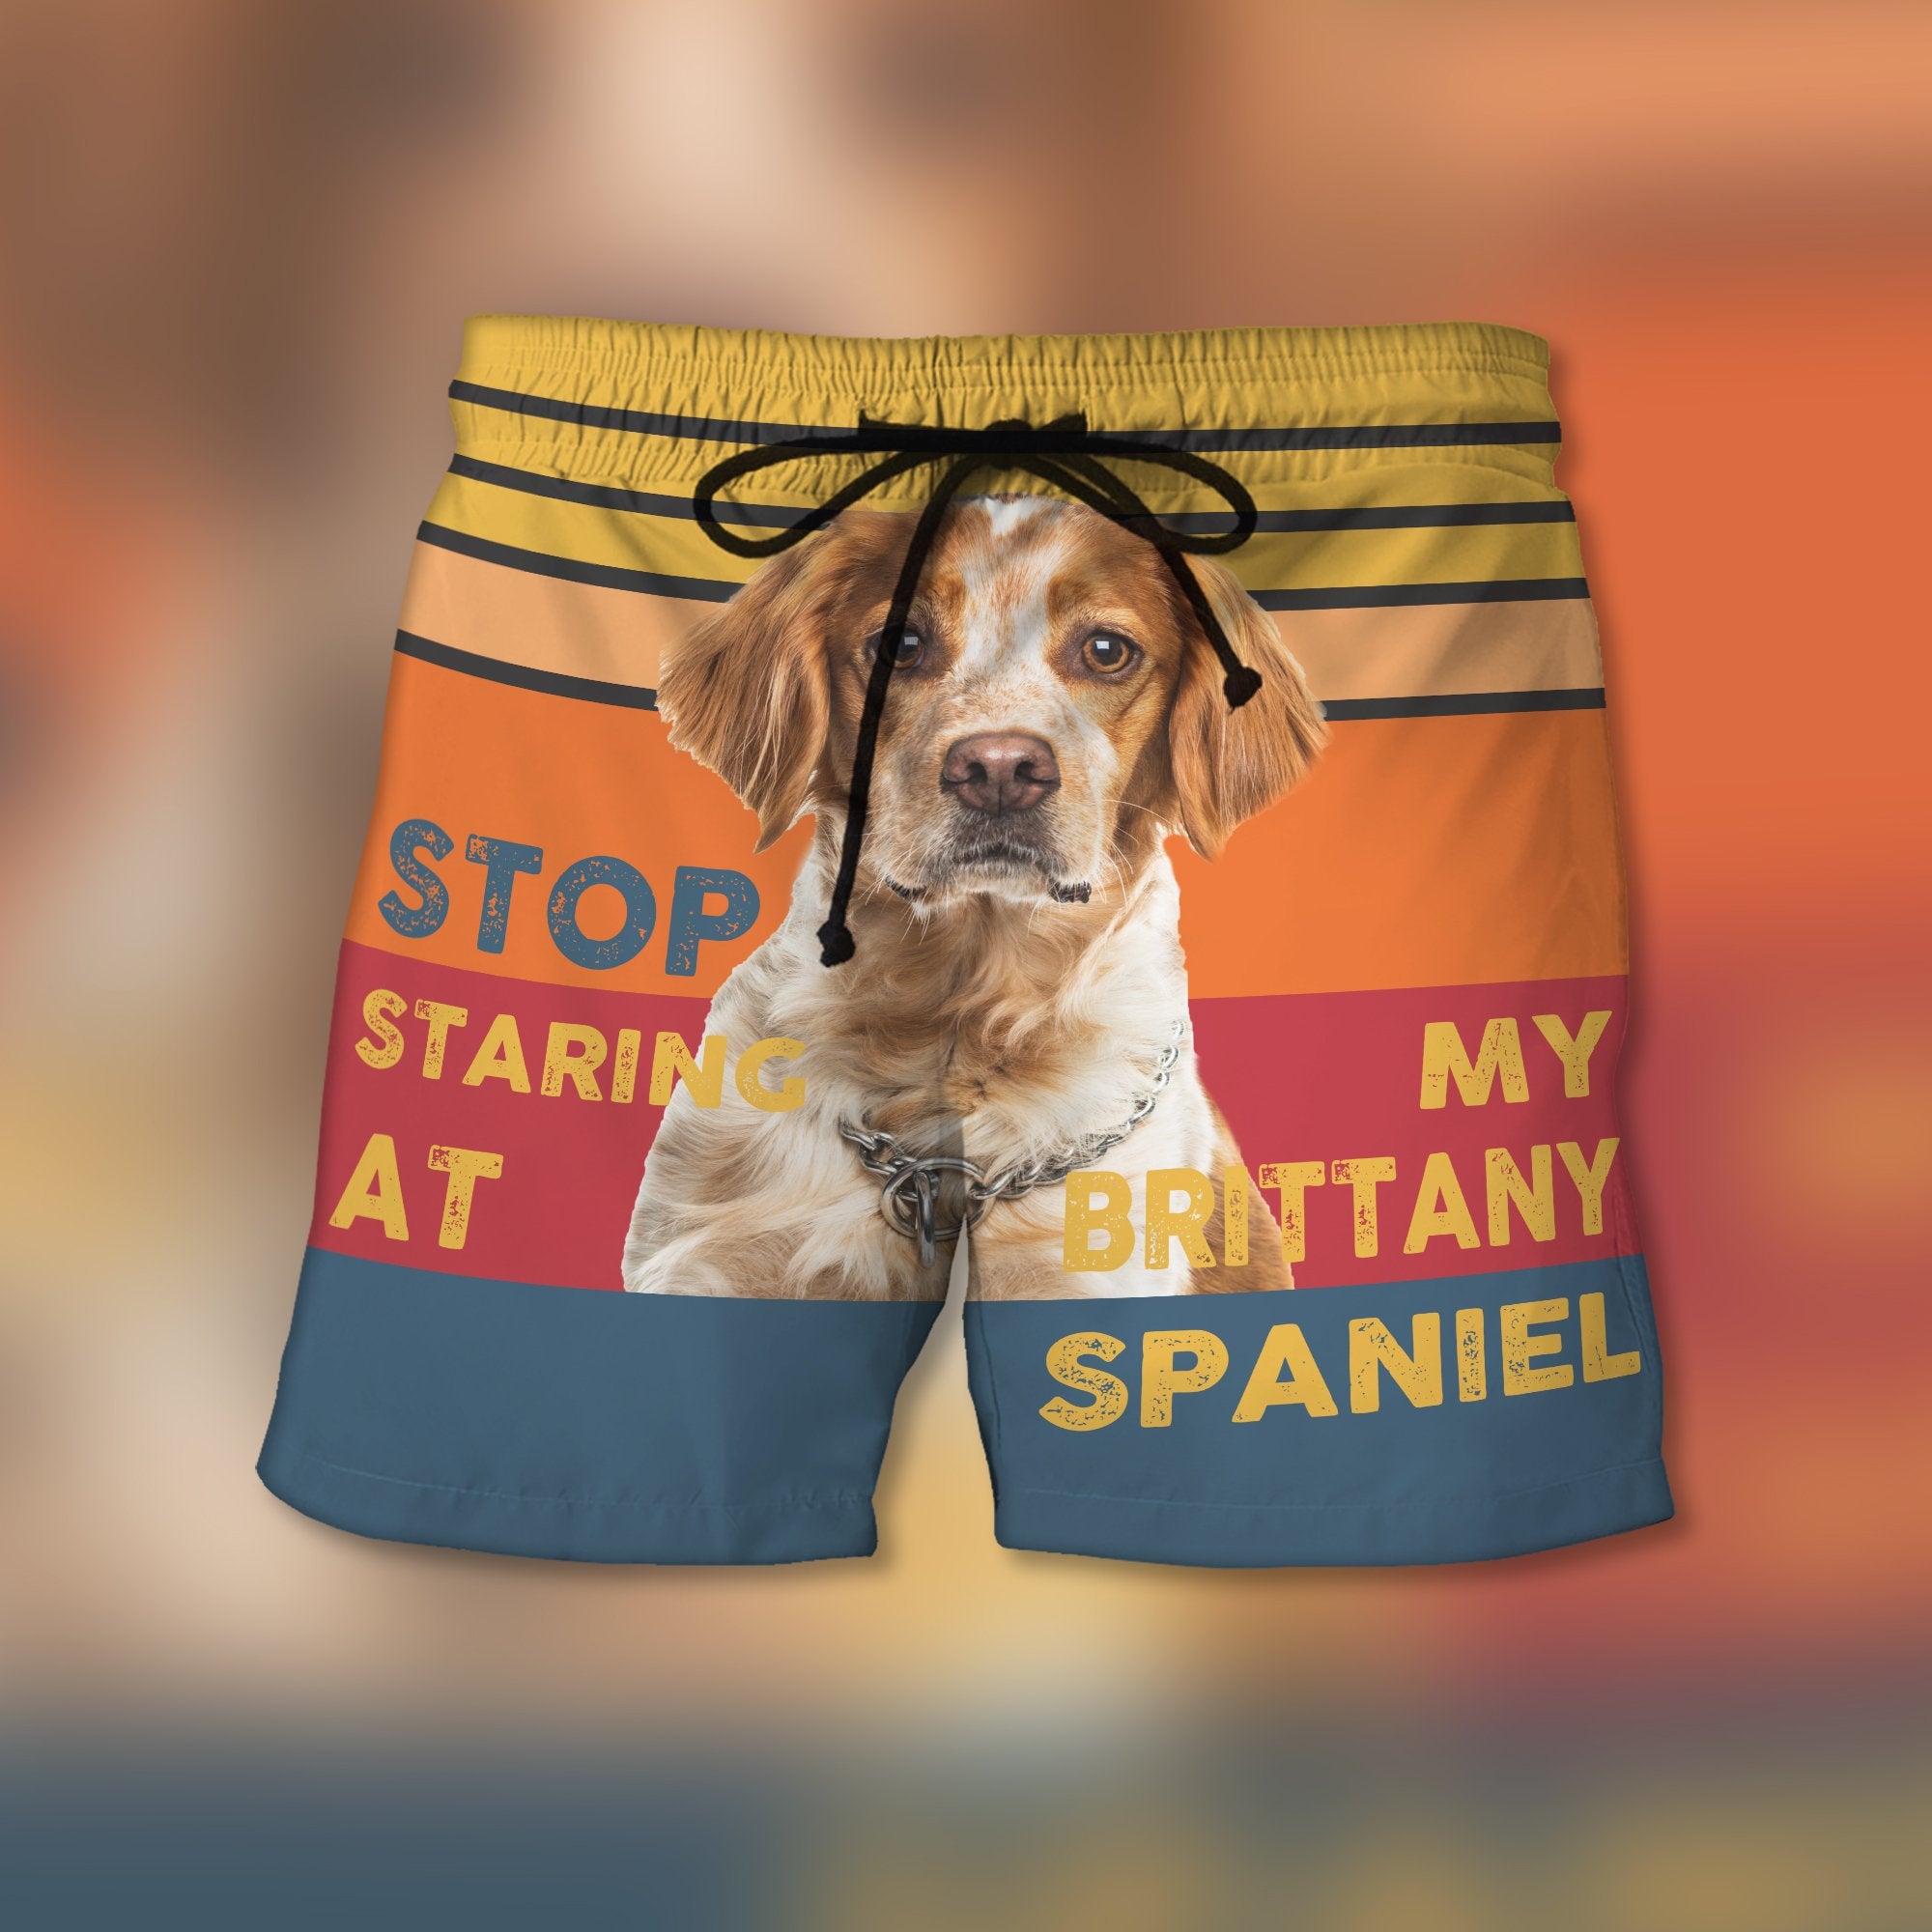 Stop Staring At My Brittany Spaniel - Custom Trunks